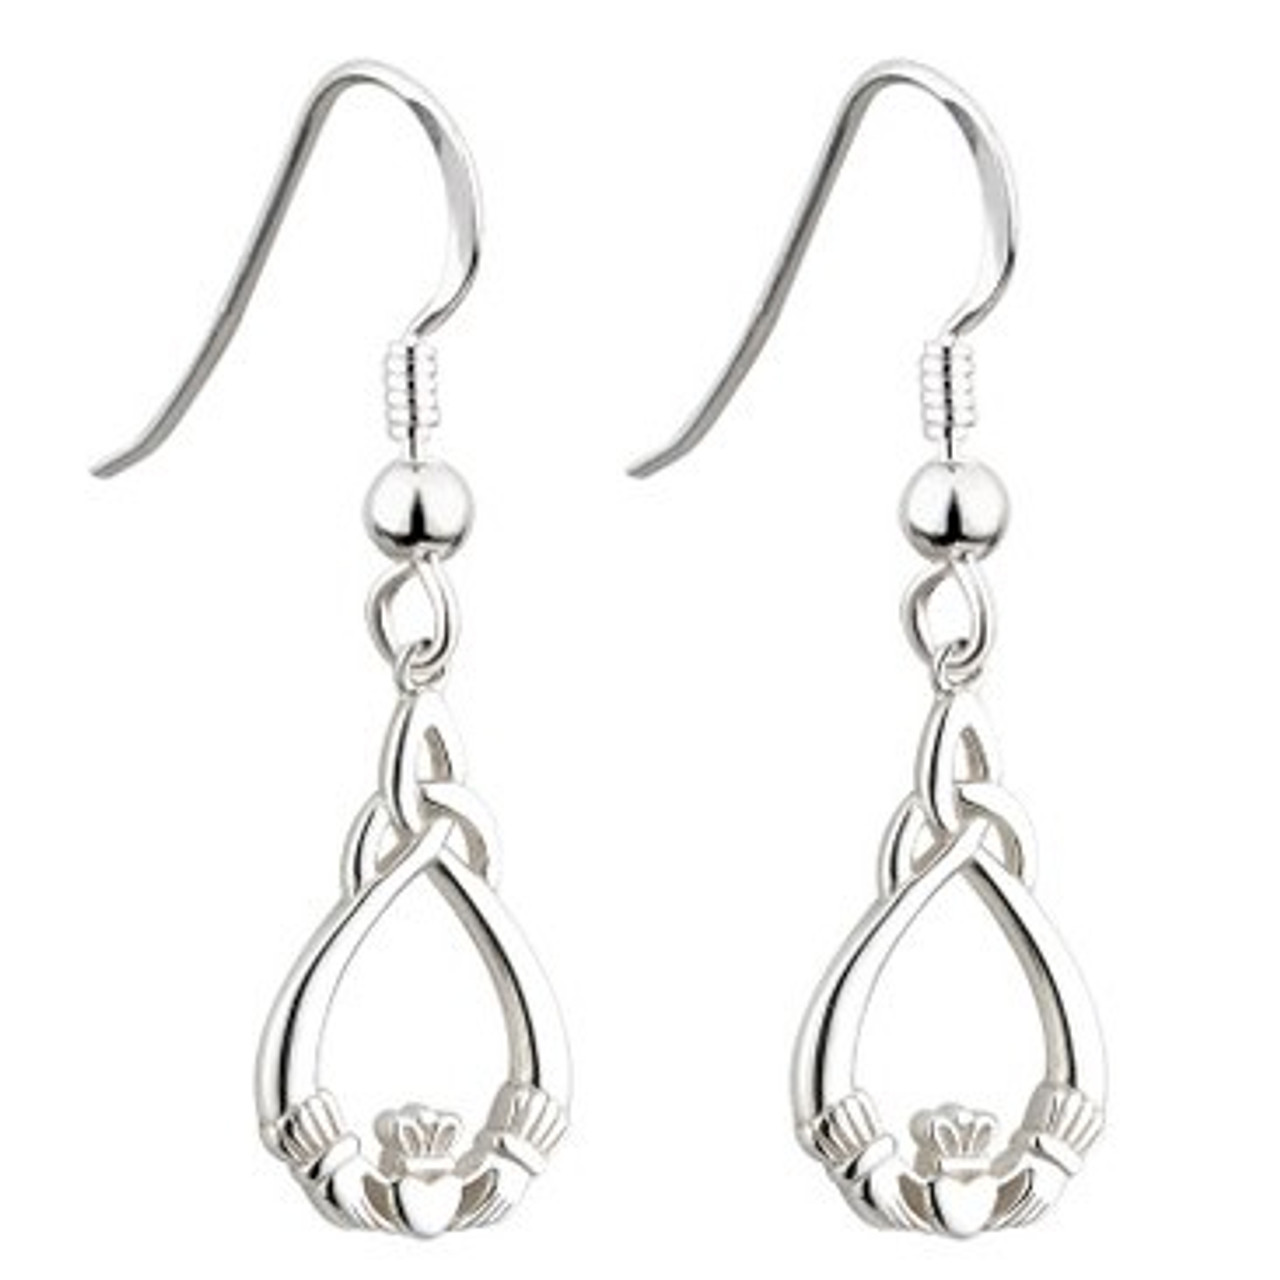 https://cdn11.bigcommerce.com/s-607zmcsnh0/images/stencil/1280x1280/products/891/3627/Sterling-Silver-Claddagh-Trinity-Drop-Earrings-fish-Hook-ExclusivelyIrish.com-S33178__23476.1691996005.jpg?c=1